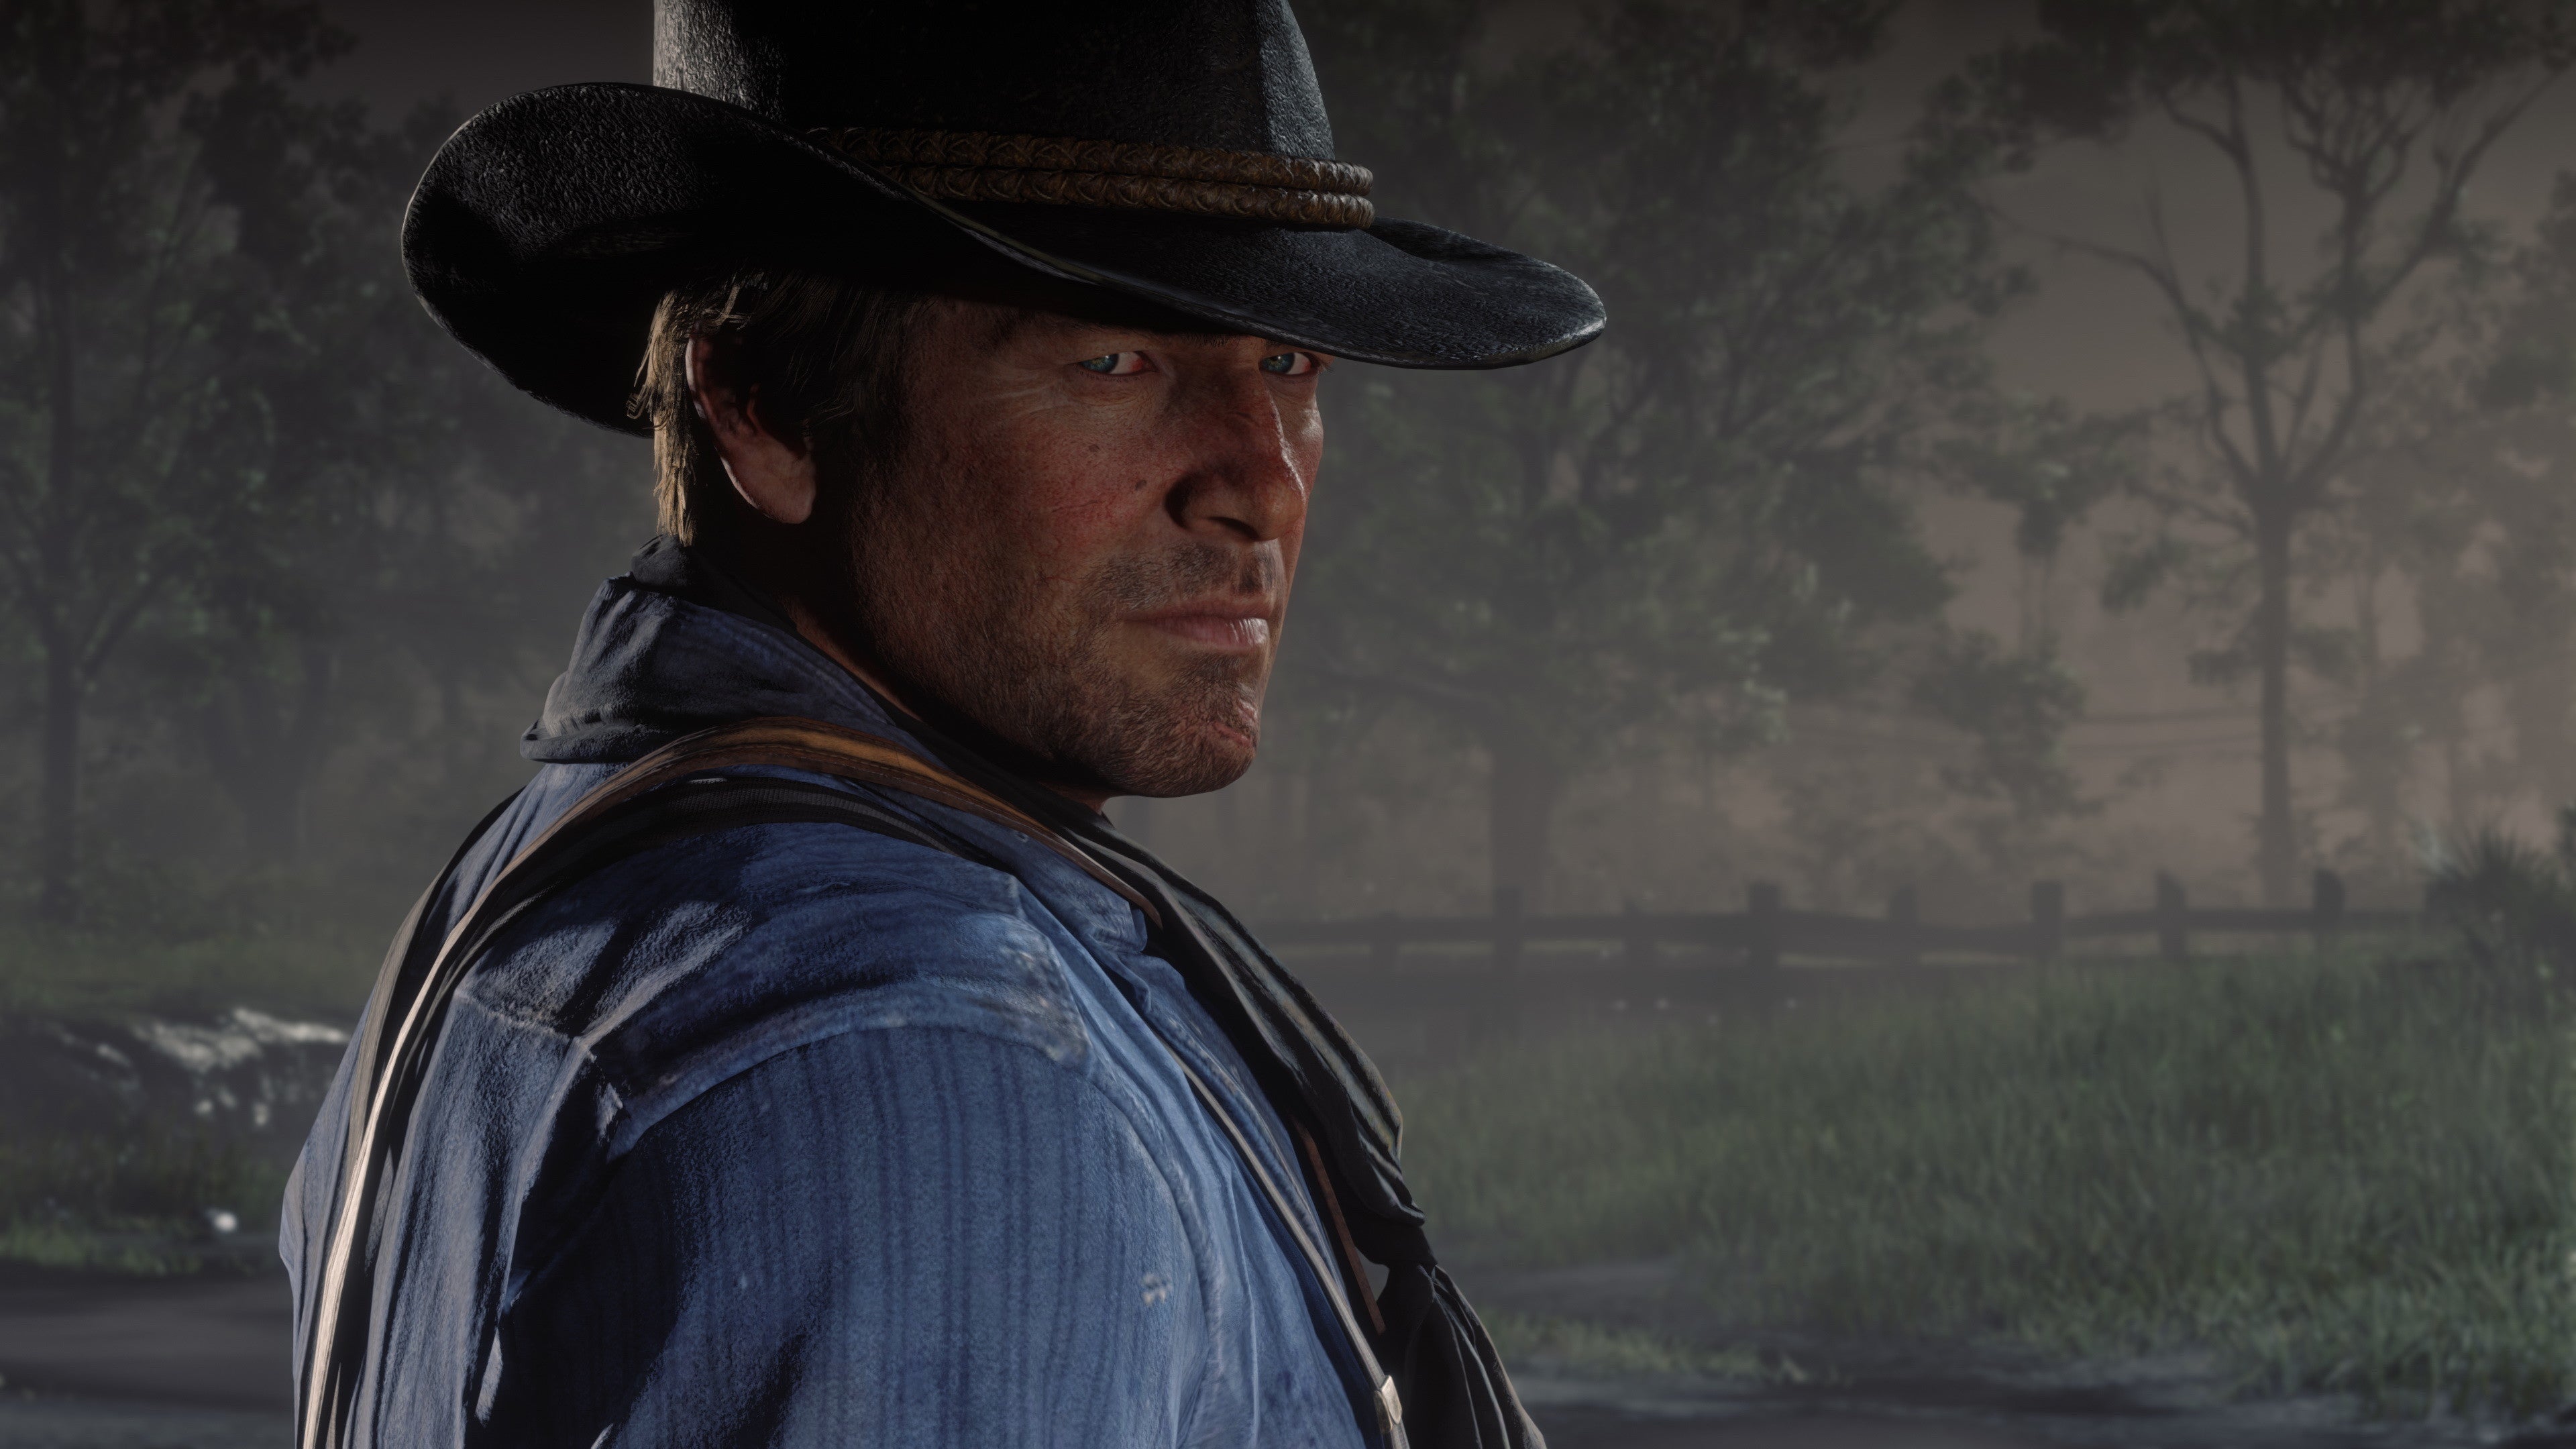 Image for Take-Two doesn't expect any other major departures at Rockstar, says Sam Houser is committed to leading the studio